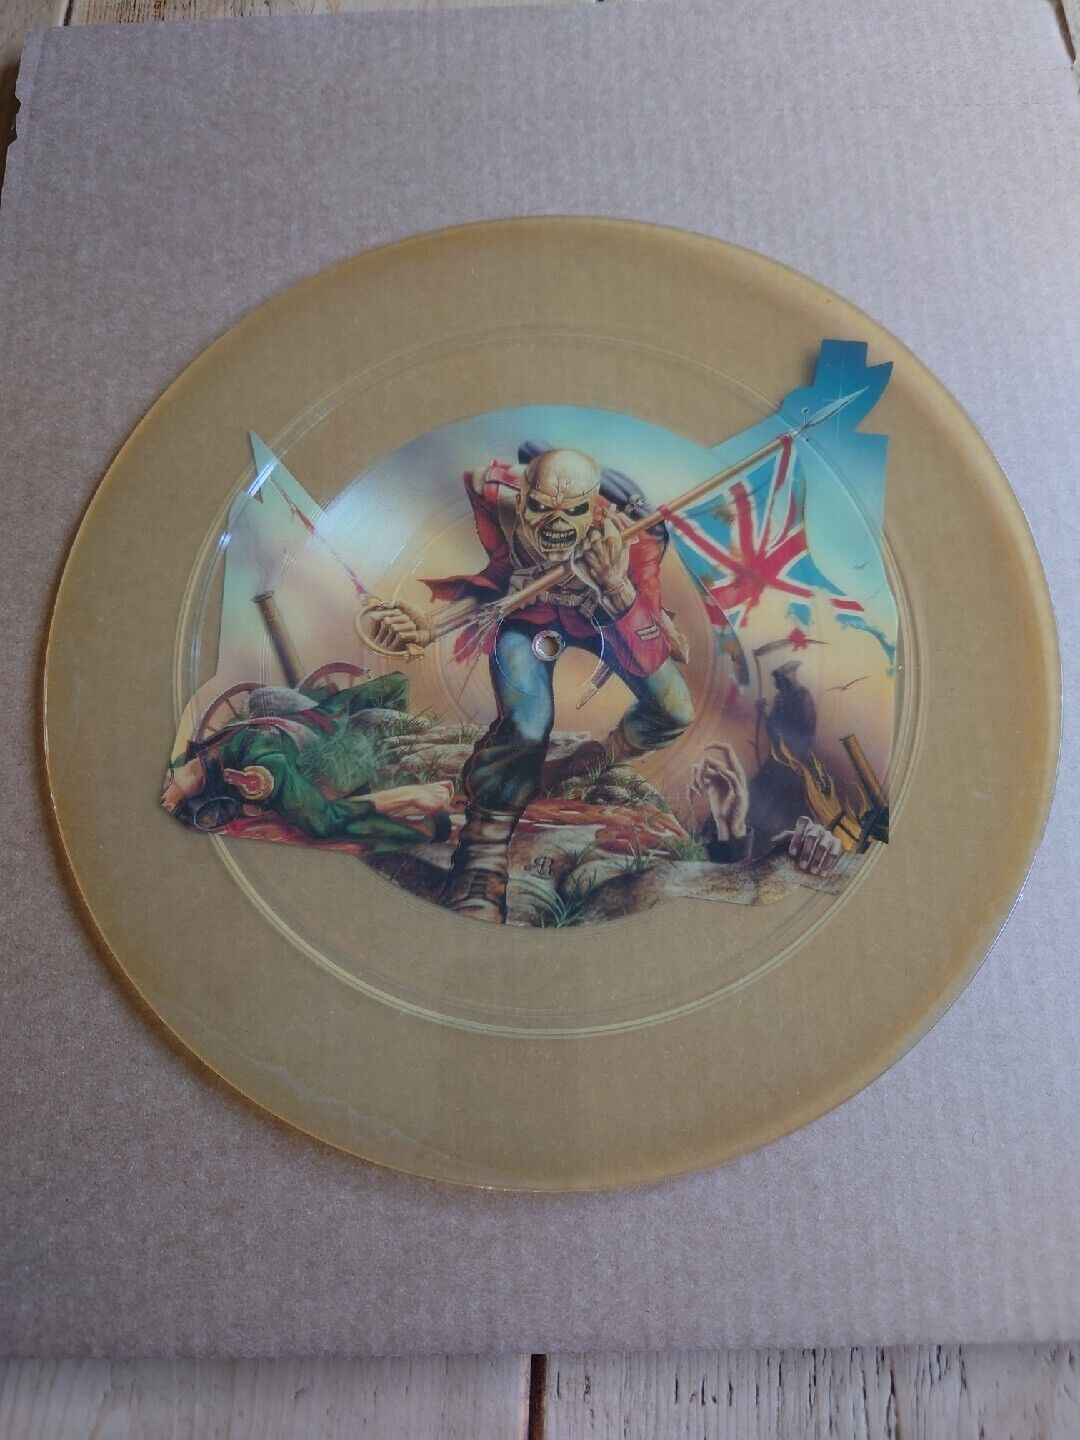 Iron Maiden Uncut picture disc of The Trooper Promo version VERY RARE